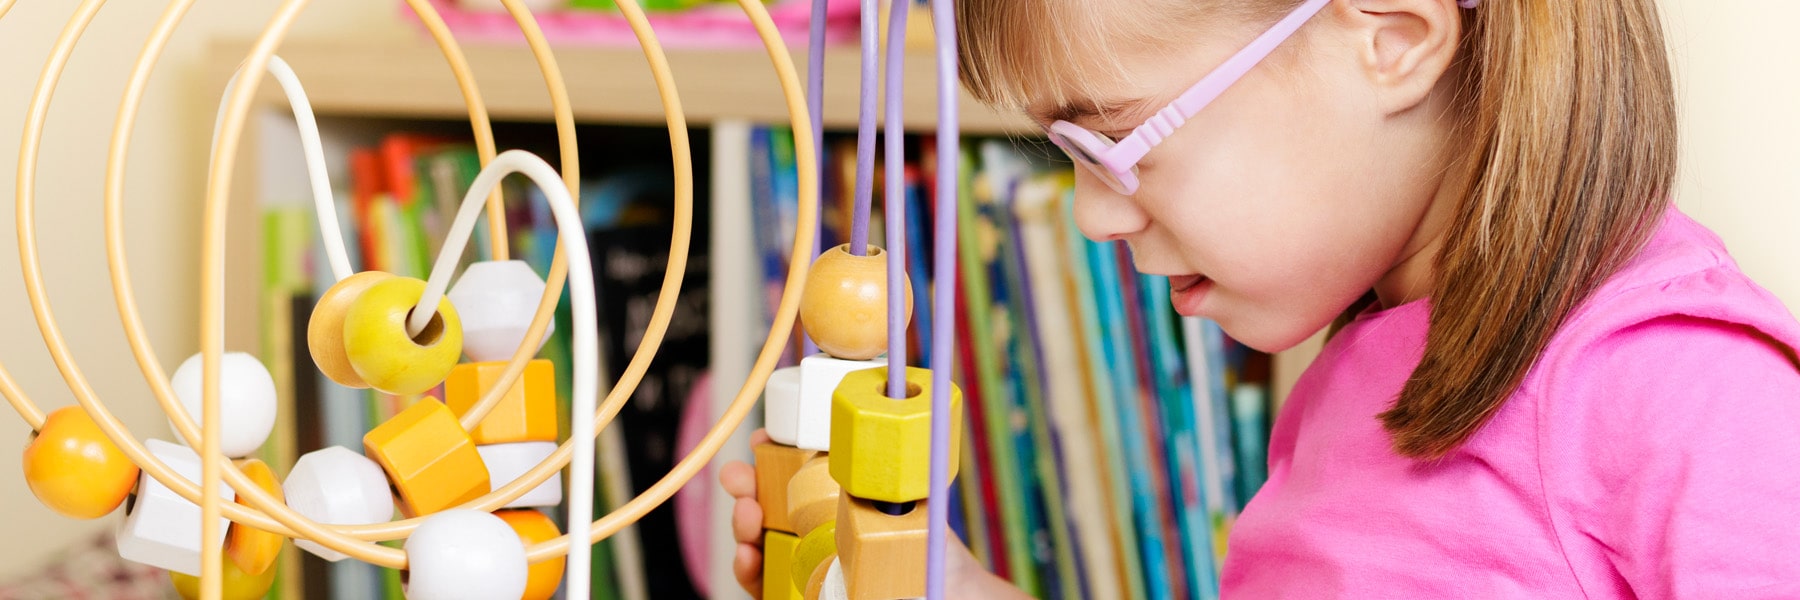 close up of toddler with pink eye glasses and circular abacus toy